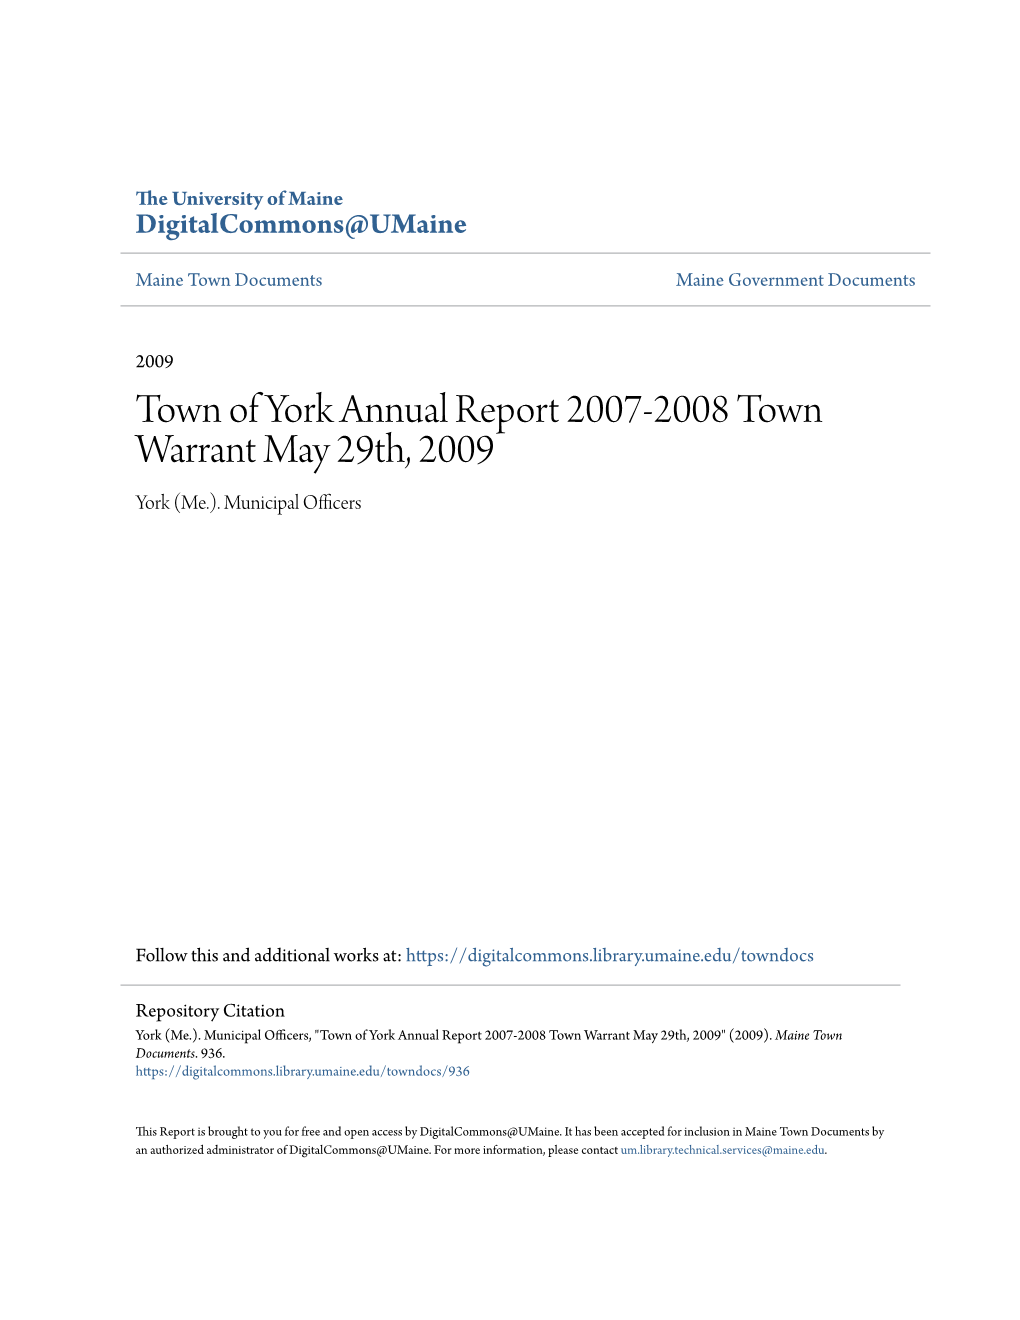 Town of York Annual Report 2007-2008 Town Warrant May 29Th, 2009 York (Me.)